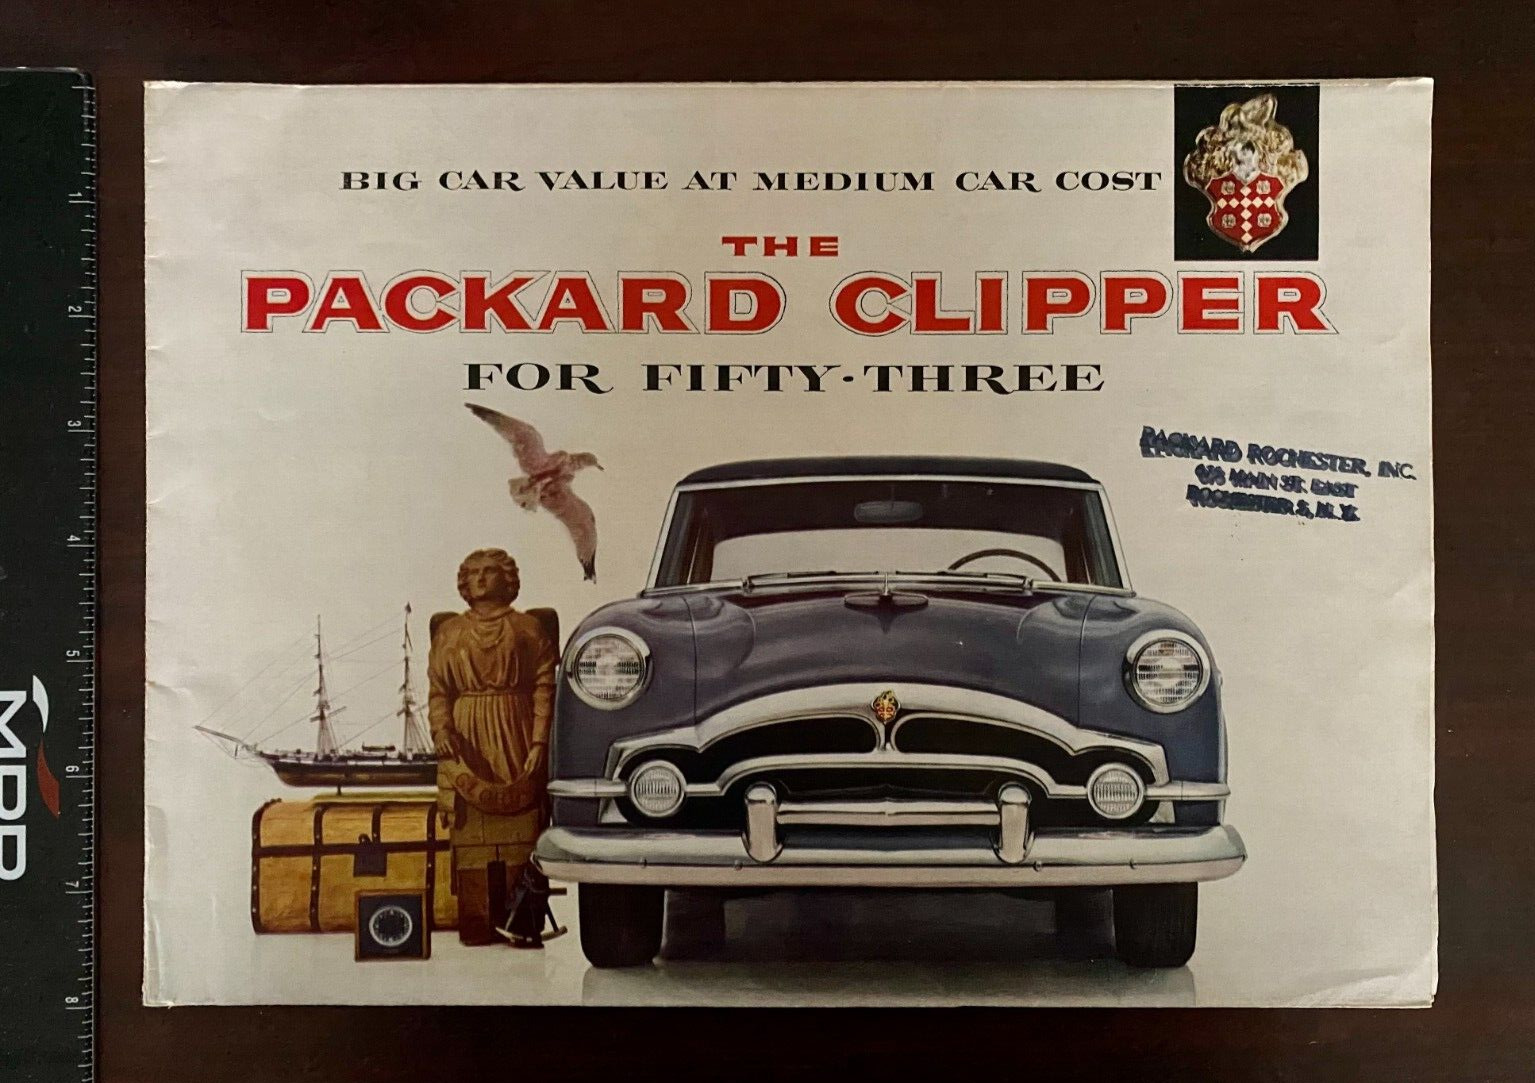 1953 The Packard Clipper for Fifty-Three - Vintage Brochure